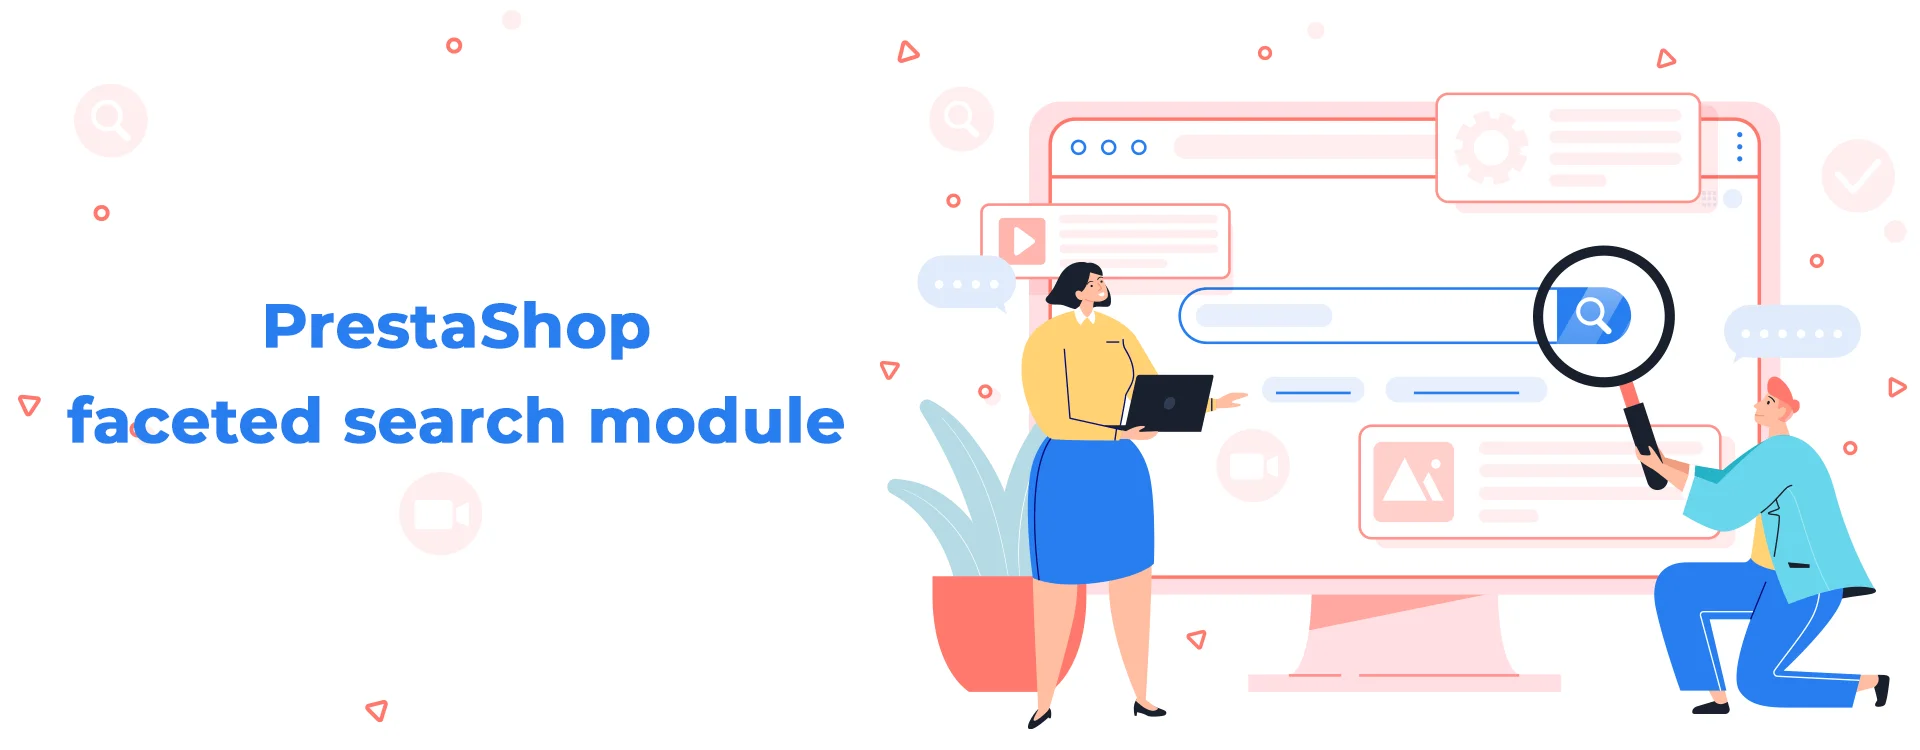 PrestaShop faceted search module and things you need to know